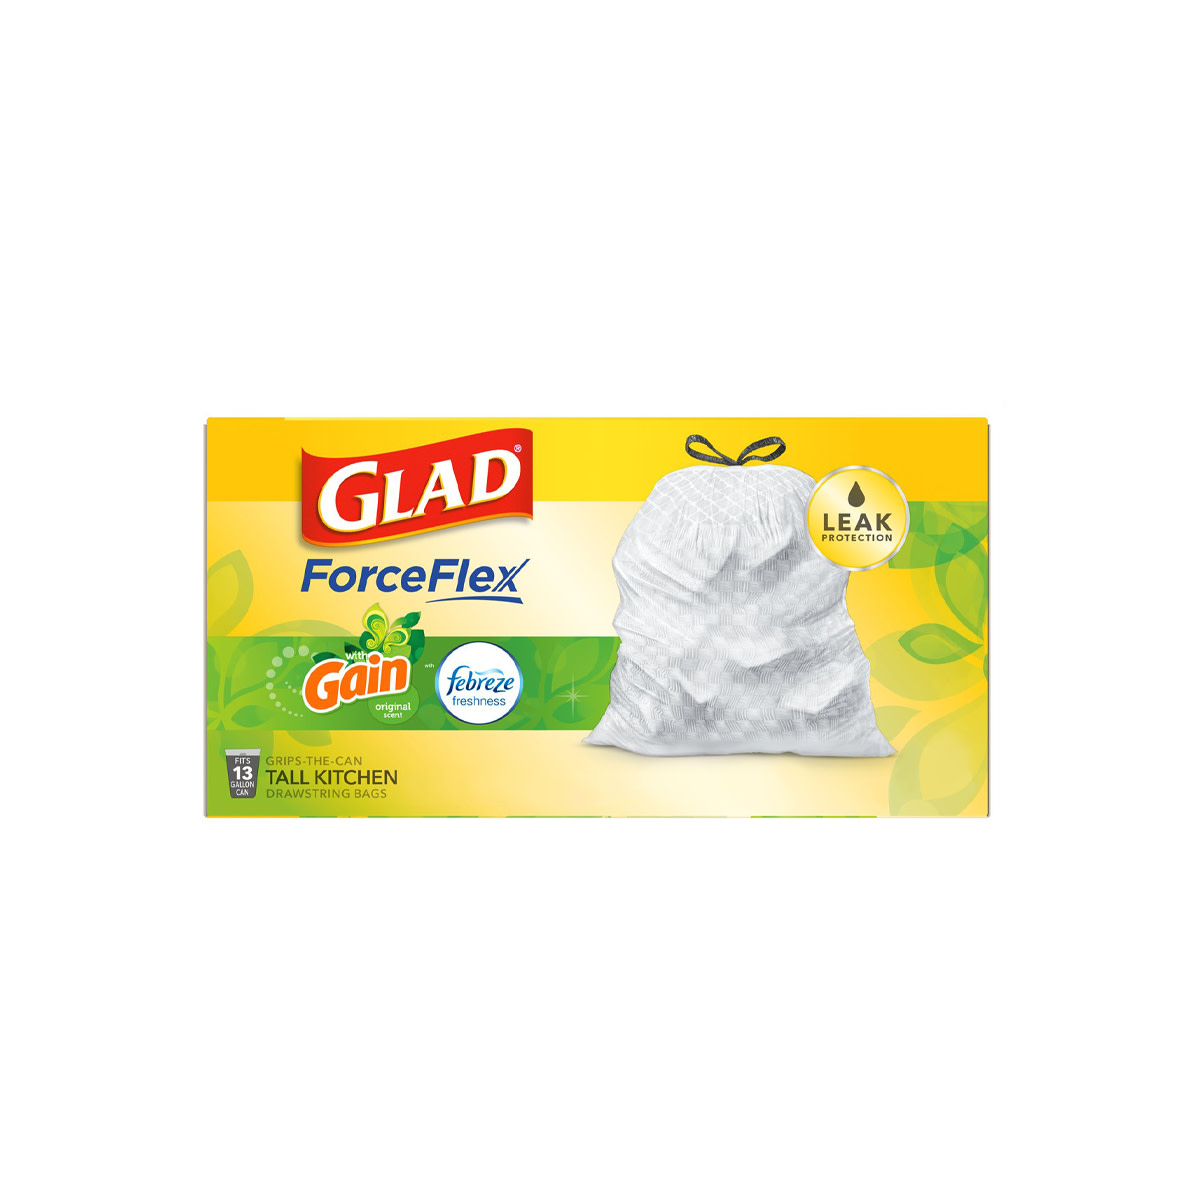 Pack of Glad® Trash Bags with the scent of Gain Original